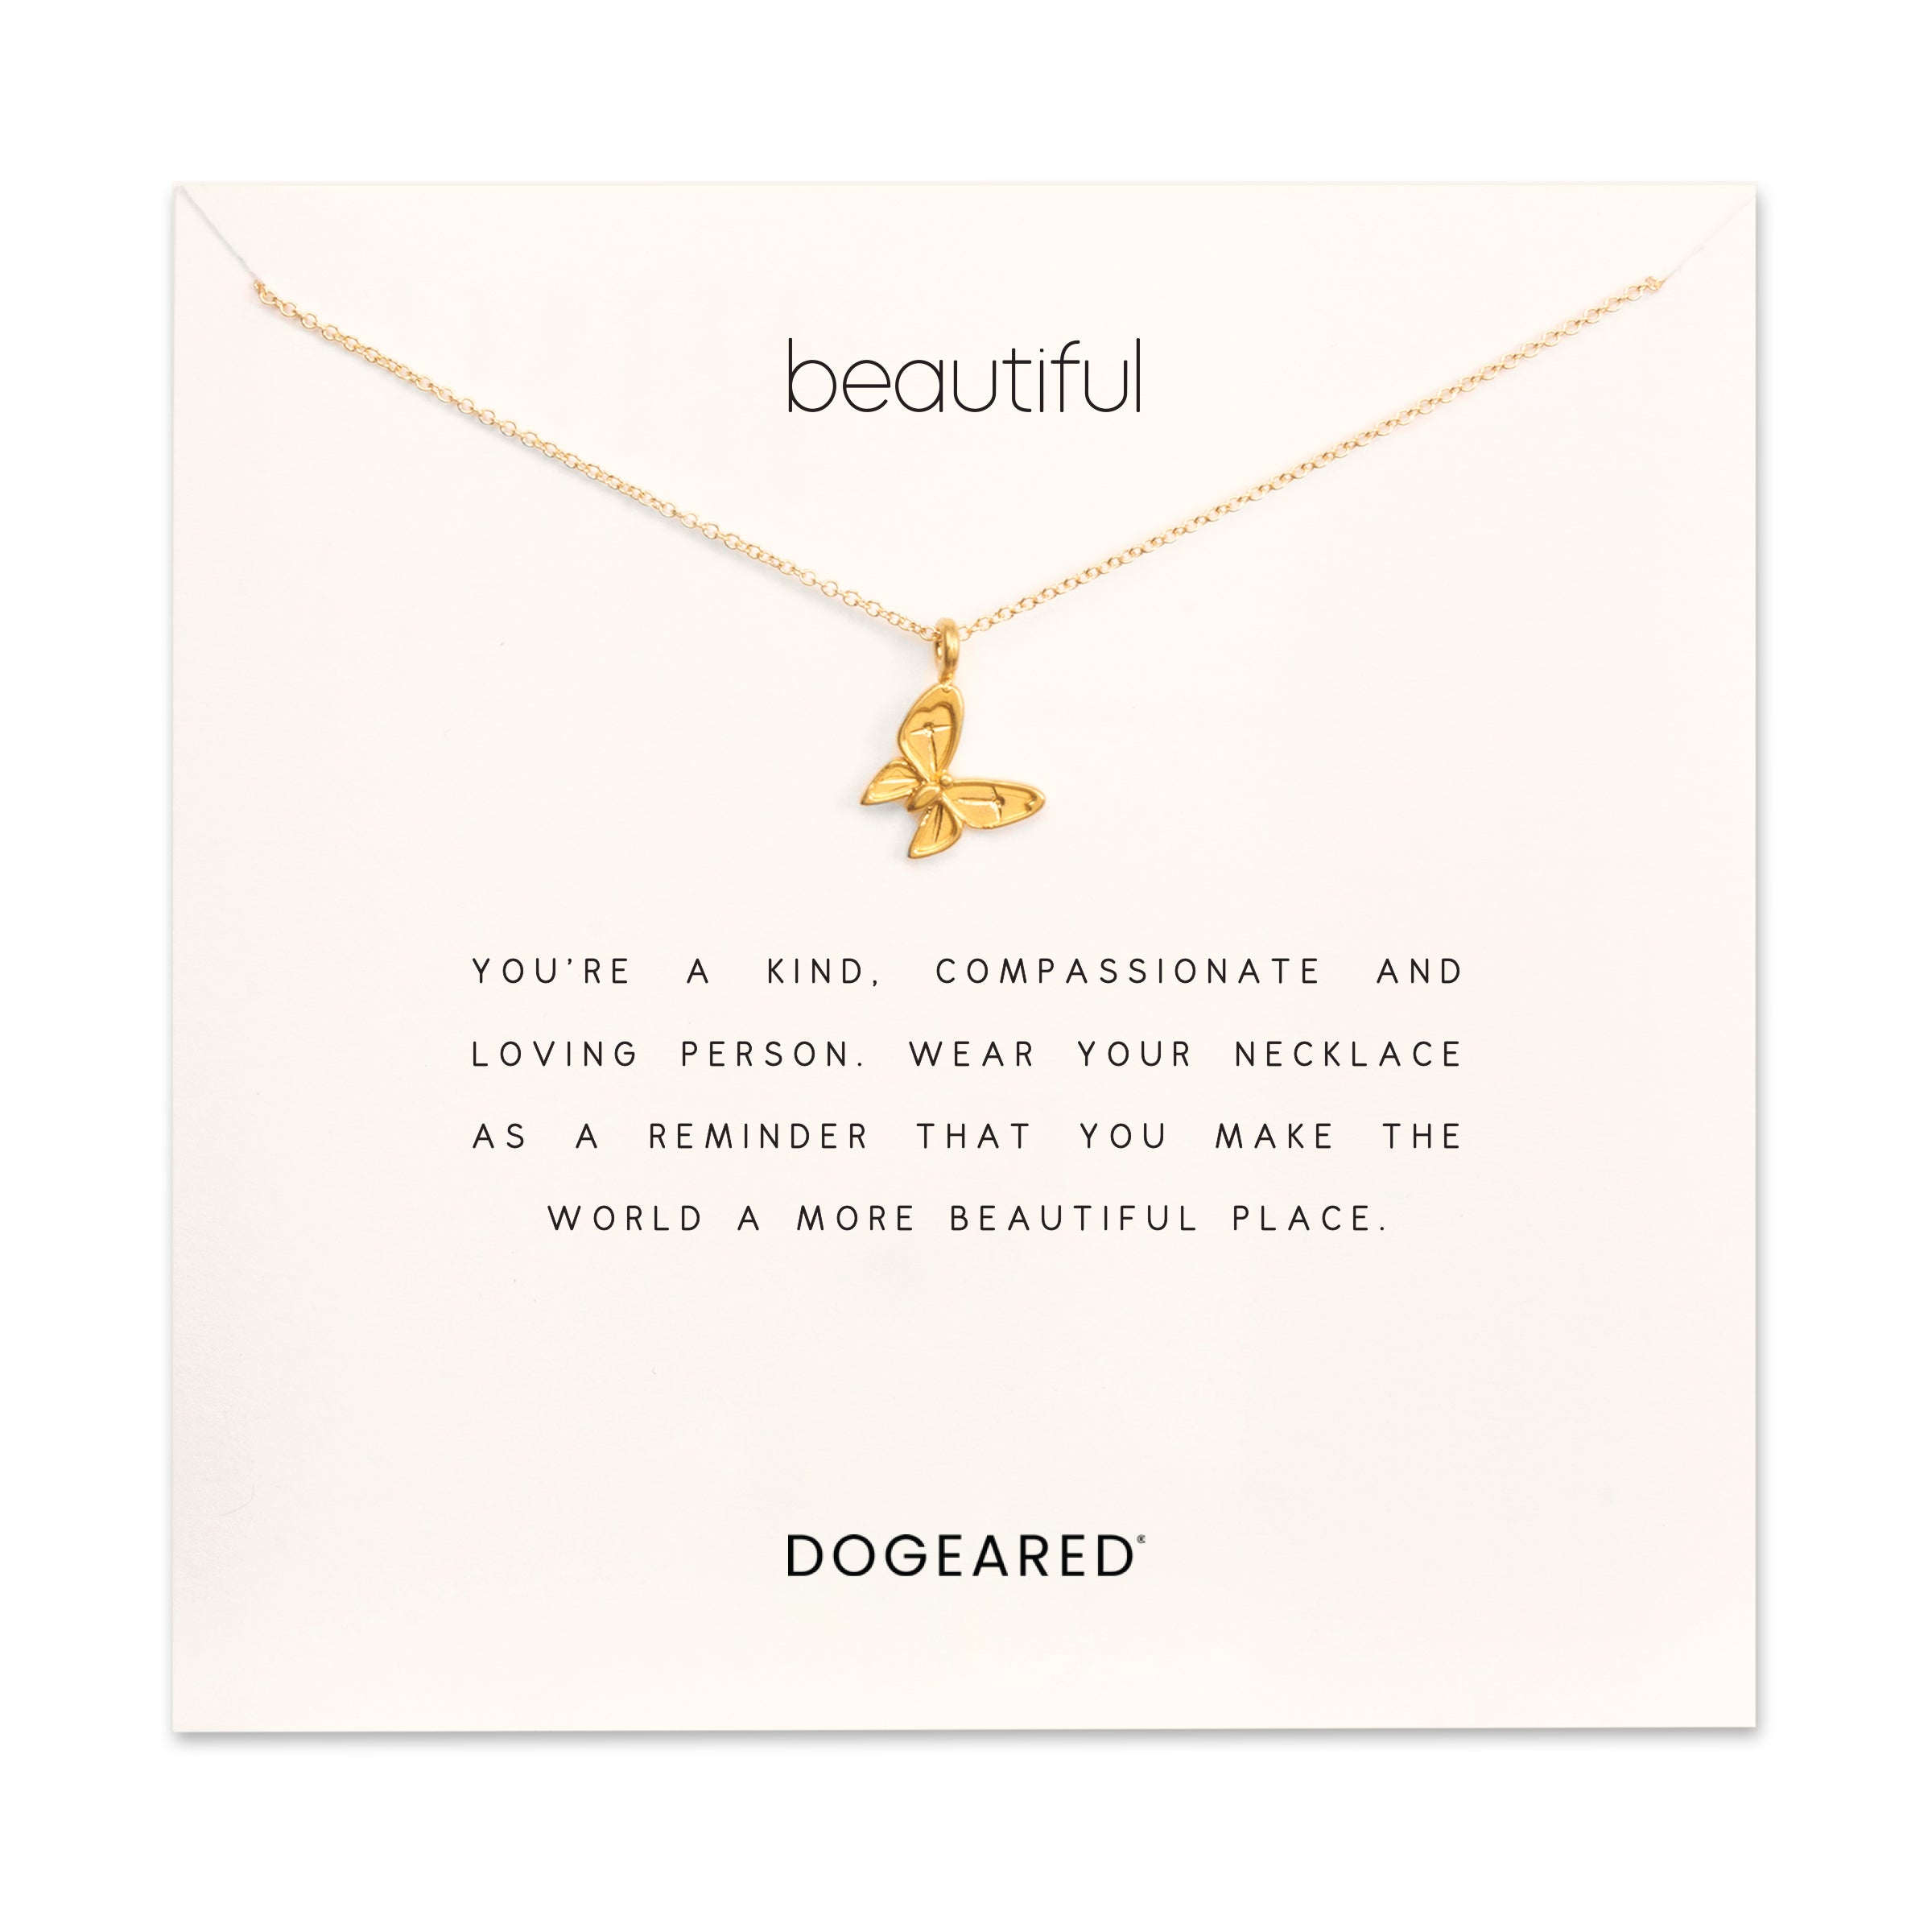 Beautiful enchanted butterfly necklace - Dogeared